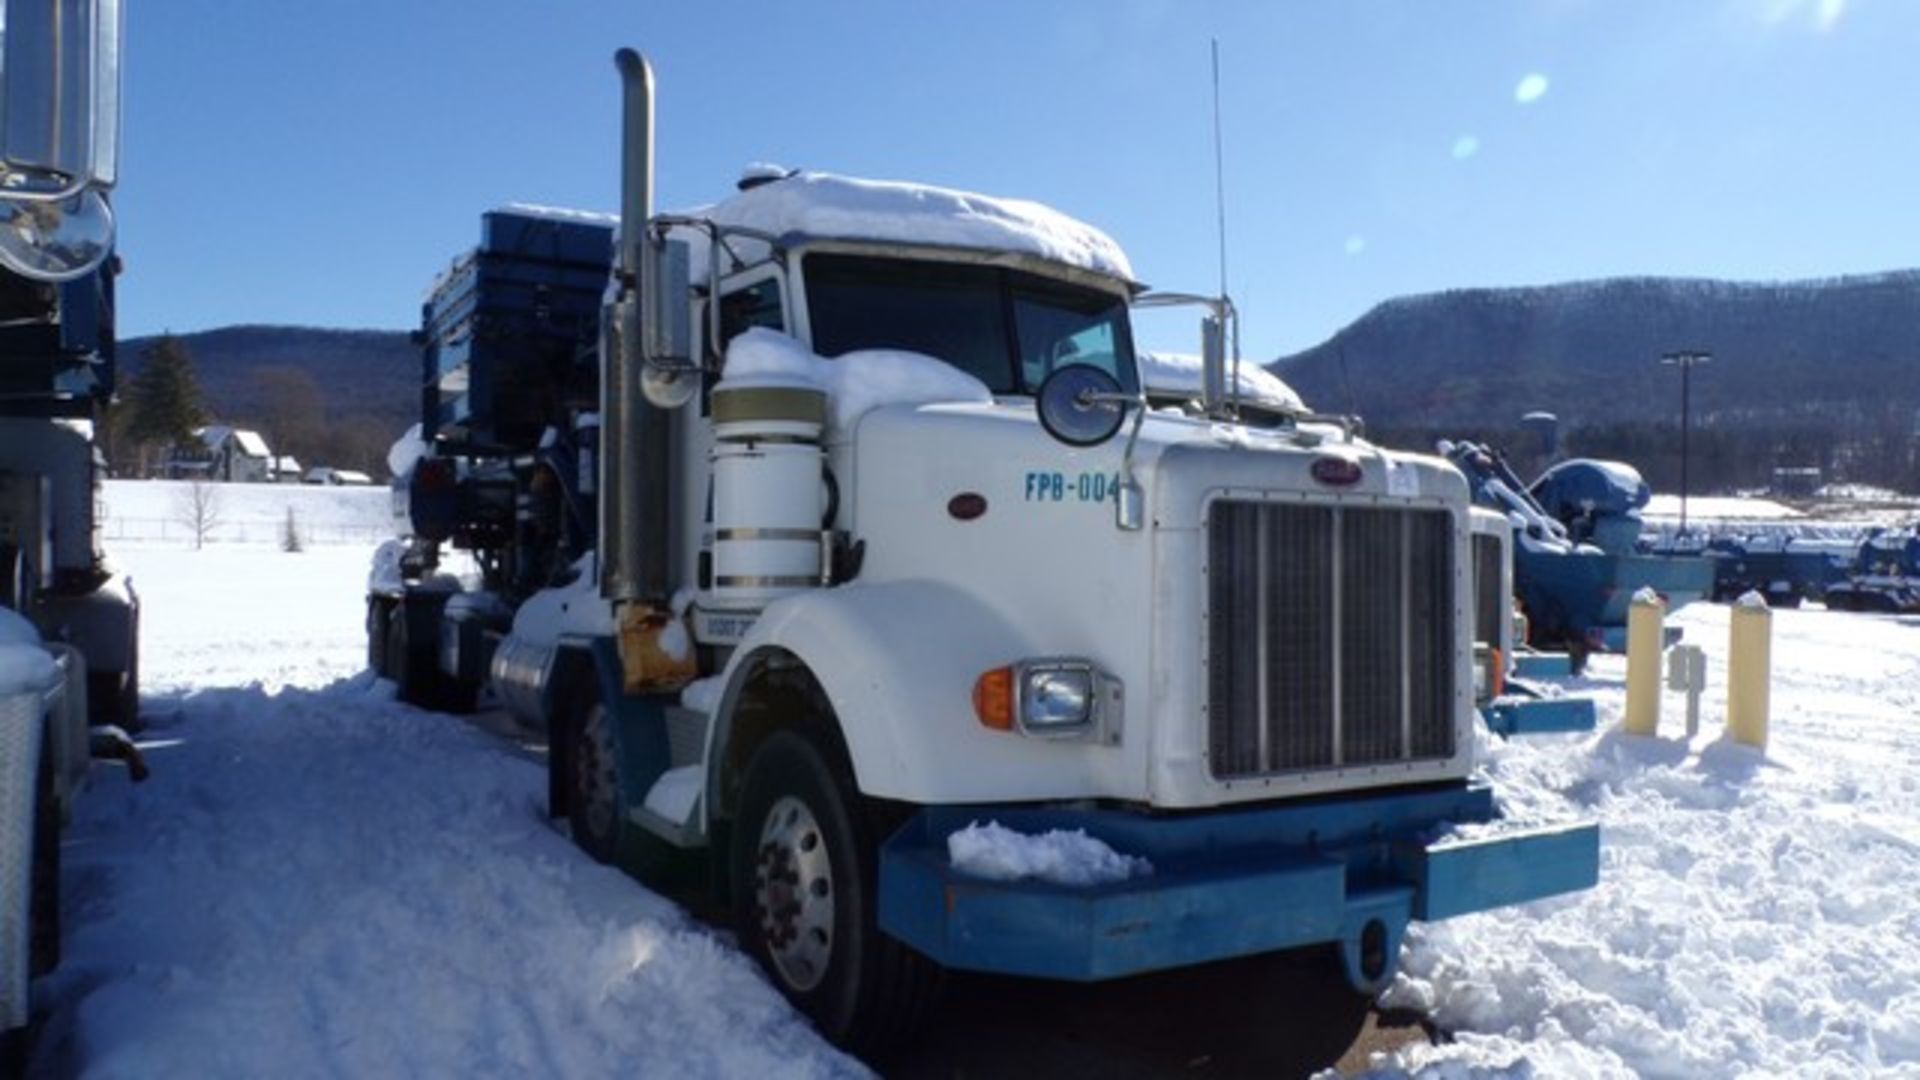 Located in YARD 5 - Mill Hall, PA - (P-8) (FPB-004) (X) 2006 PETERBILT 378TANDE - Image 11 of 13